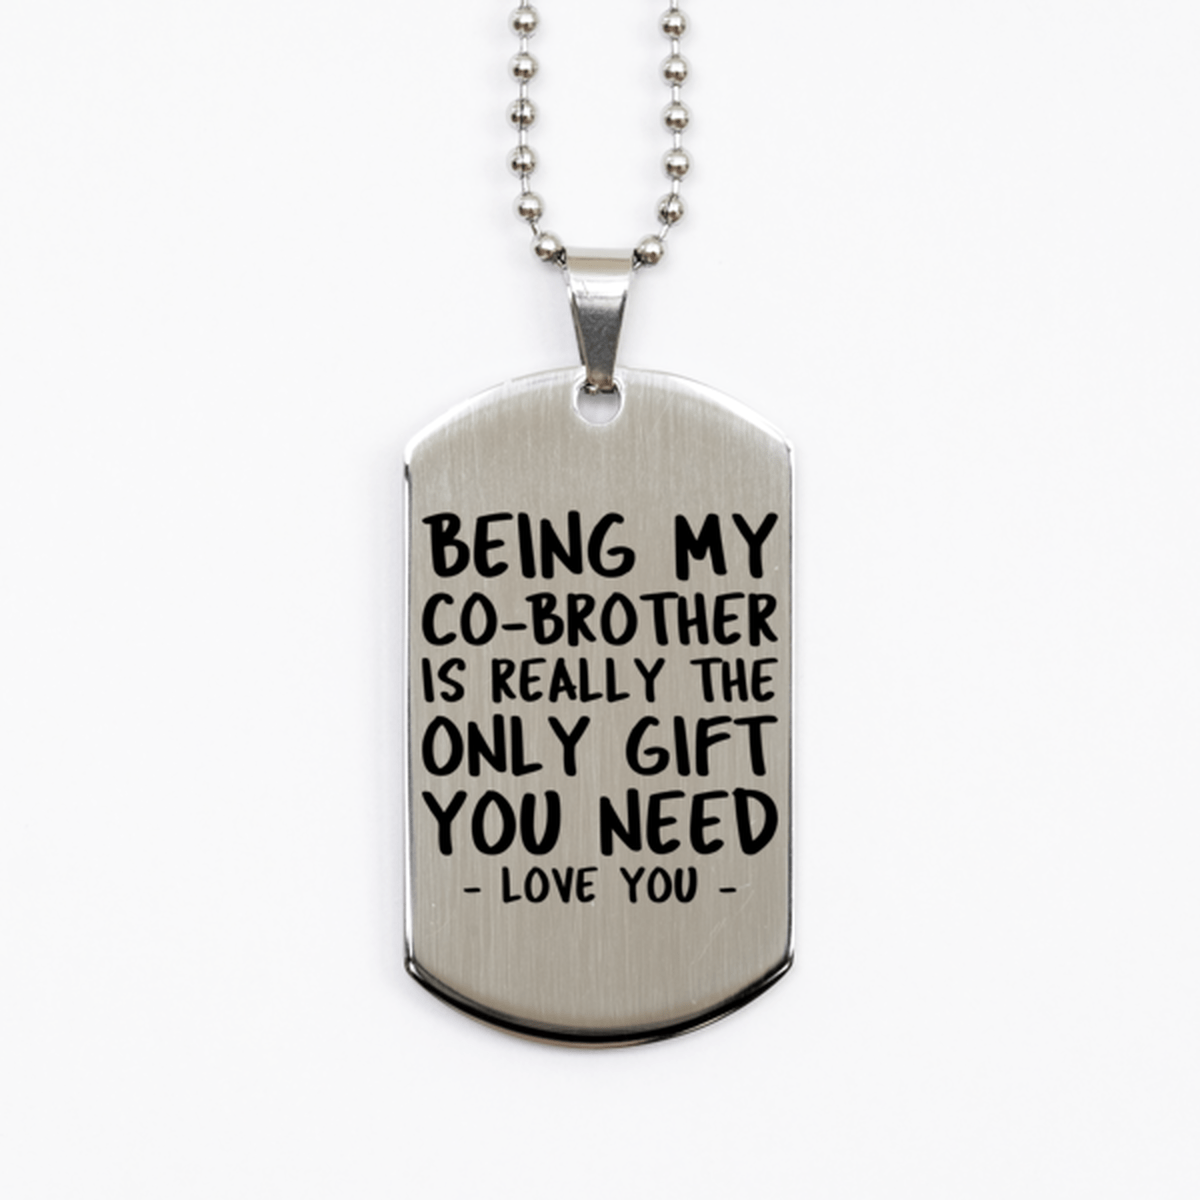 Funny Co-brother Silver Dog Tag Necklace, Being My Co-brother Is Really the Only Gift You Need, Best Birthday Gifts for Co-brother